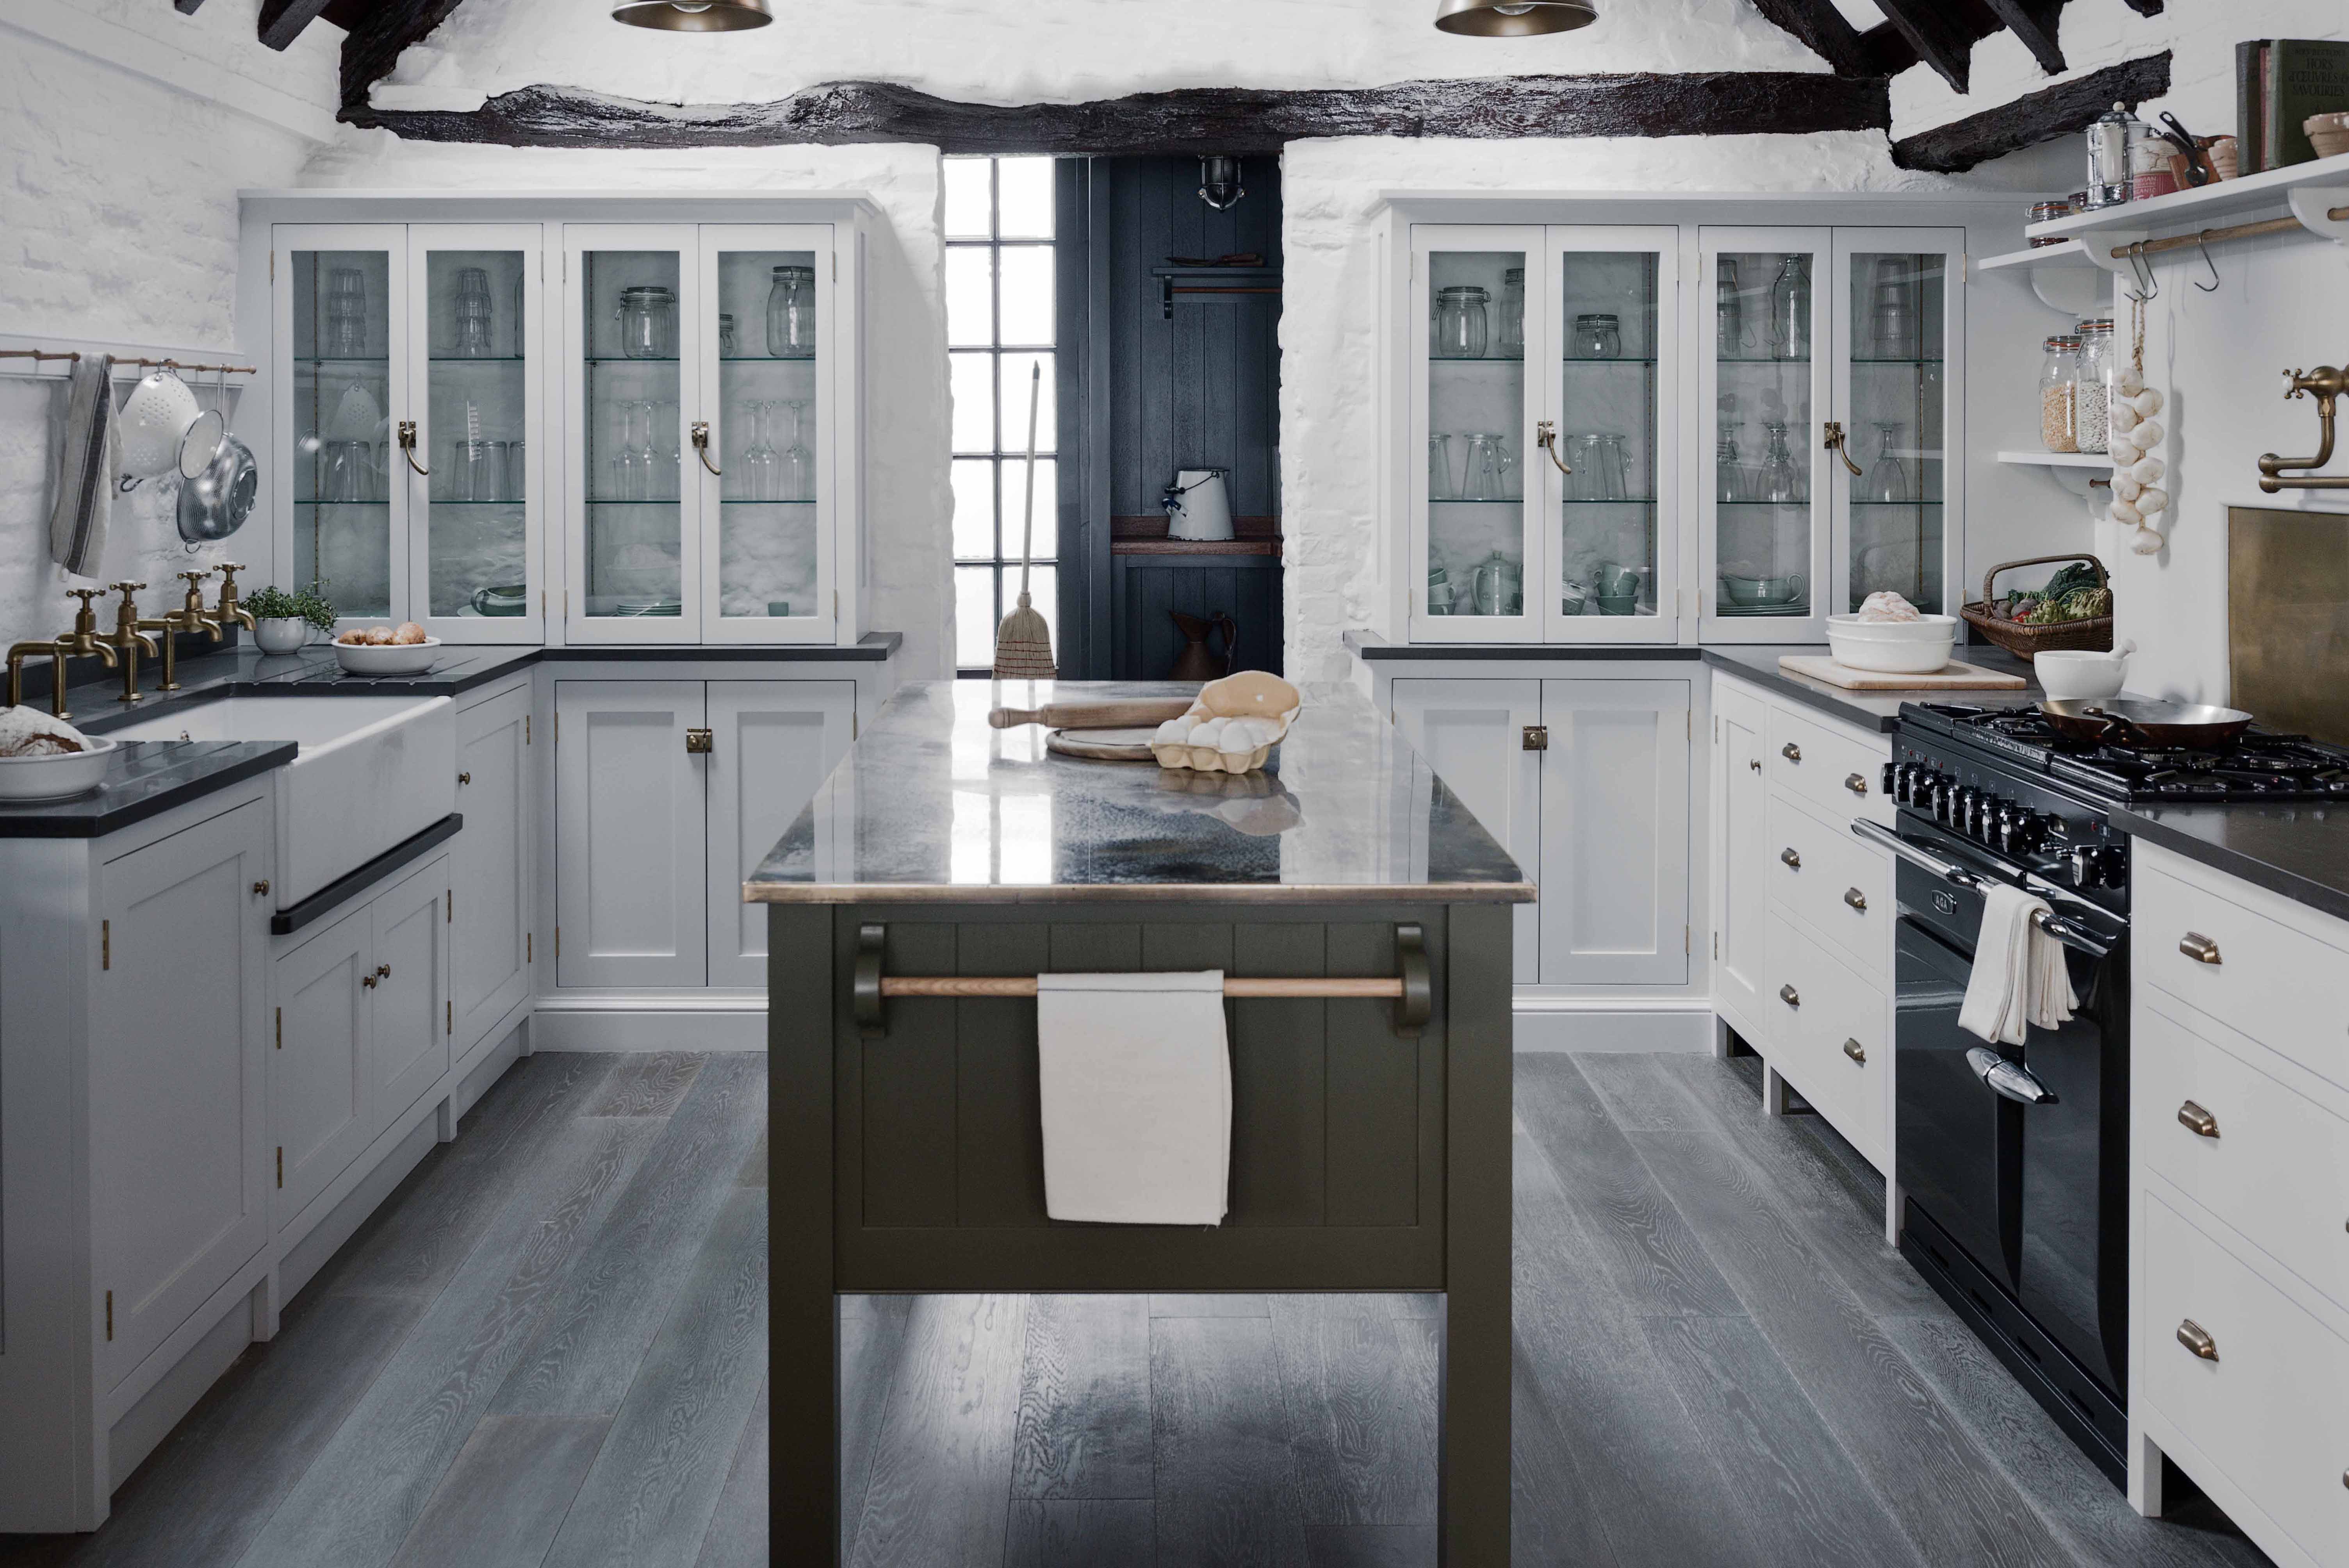 Traditional country shaker style bespoke kitchen mylands aga armac martin perrin and rowe copper brass tops midhurst